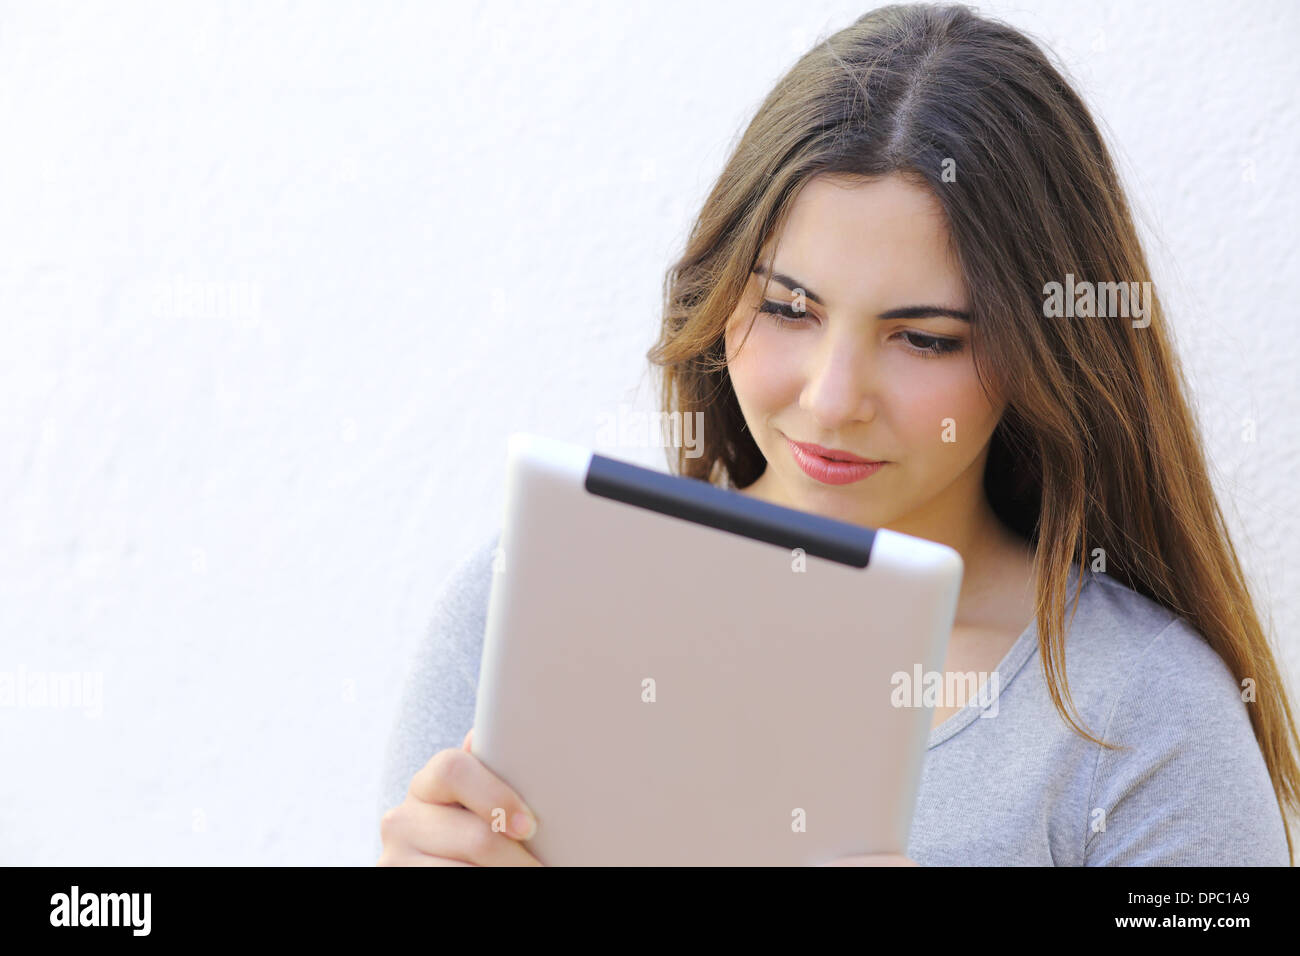 Portrait of a woman reading a tablet ebook on a white wall Stock Photo